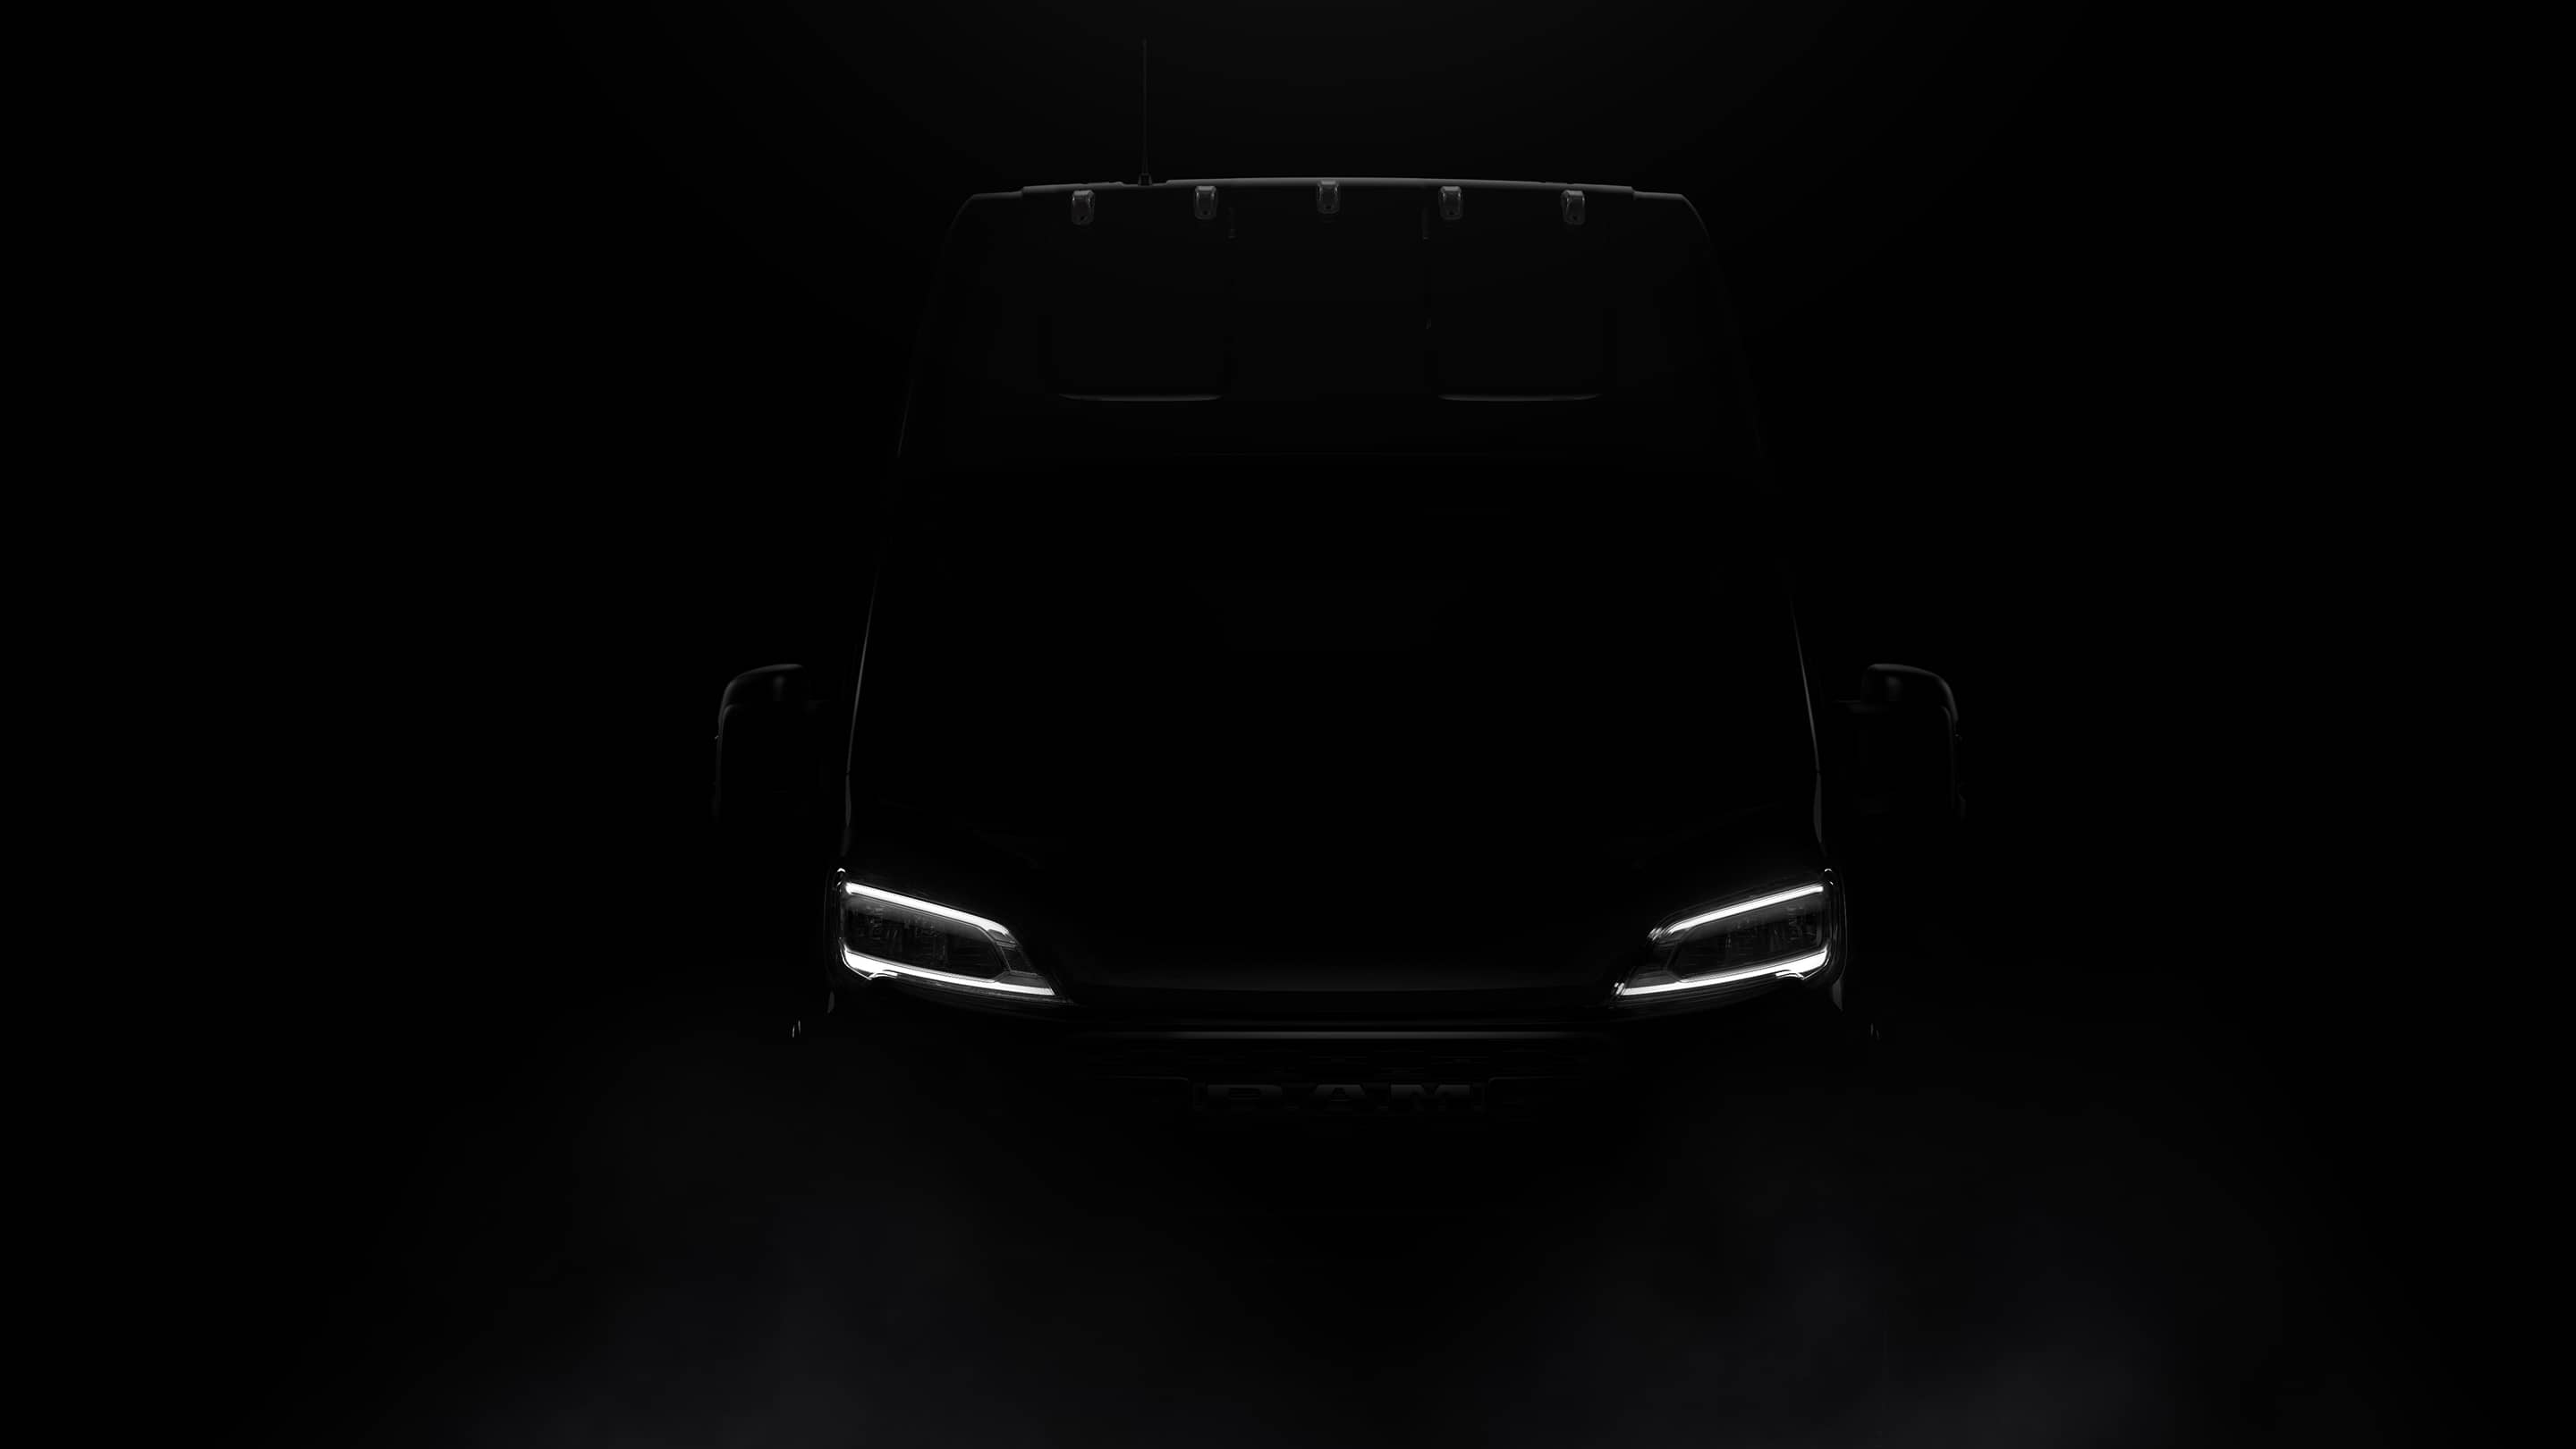 Display A silhouette of the 2023 Ram ProMaster 3500 Cargo Van Super High Roof in a darkened room, with the sole illumination coming from its lit headlamps.